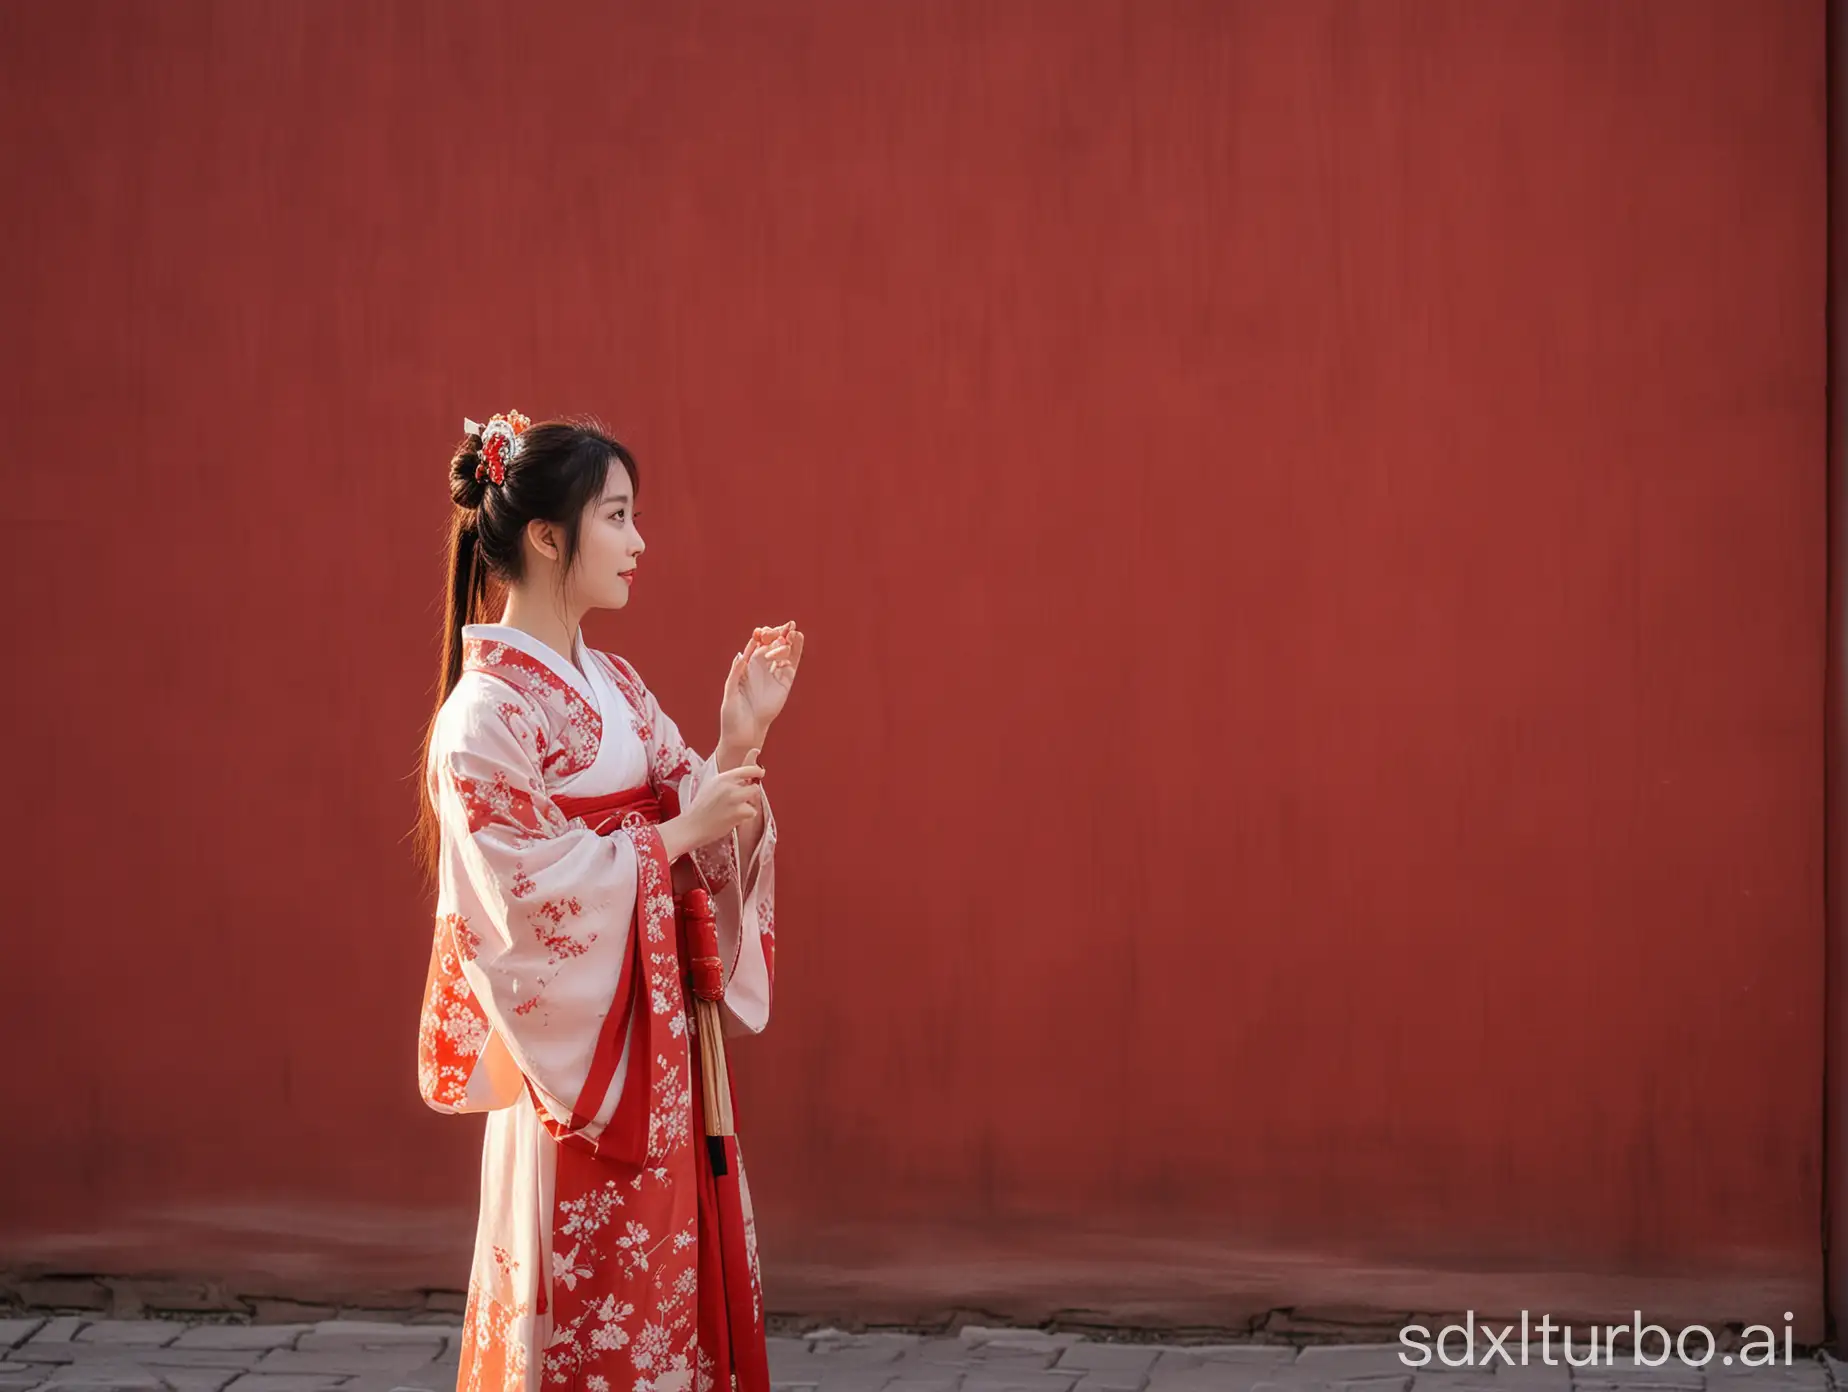 A young lady in Hanfu is taking photos in front of a red wall as the evening sun sets.